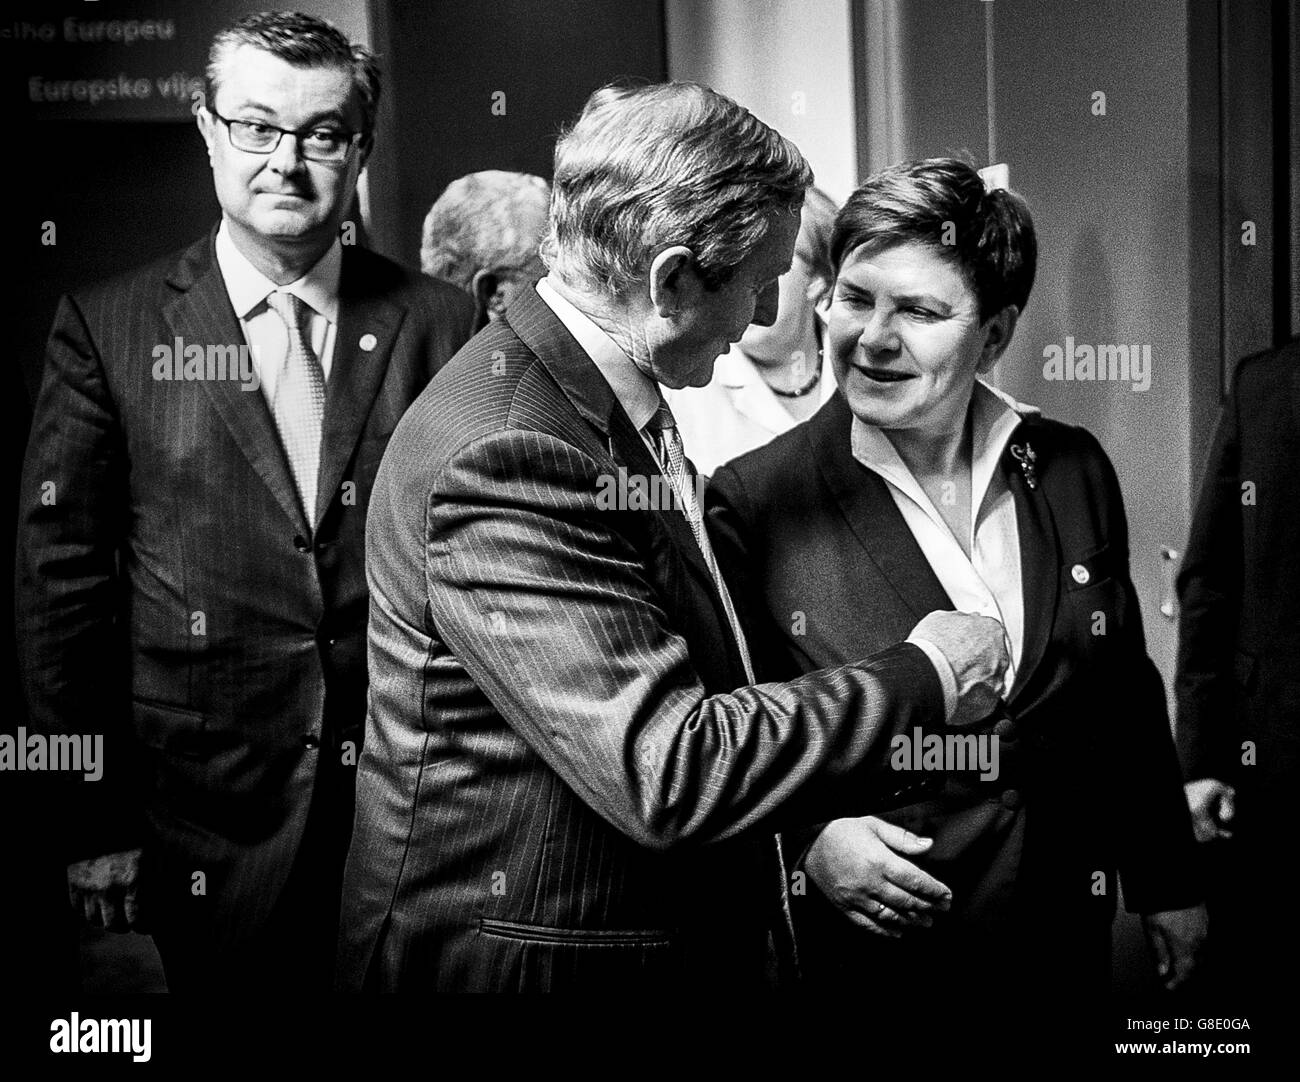 Brussels, Belgium. 28th June, 2016. Ireland Prime Minister Enda Kenny (L) talks with Polish Prime Minister Beata Szydlo during a group photo taken during the European Council meeting at European Council headquarters in Brussels, Belgium on 28.06.2016 by Wiktor Dabkowski | usage worldwide © dpa/Alamy Live News Stock Photo